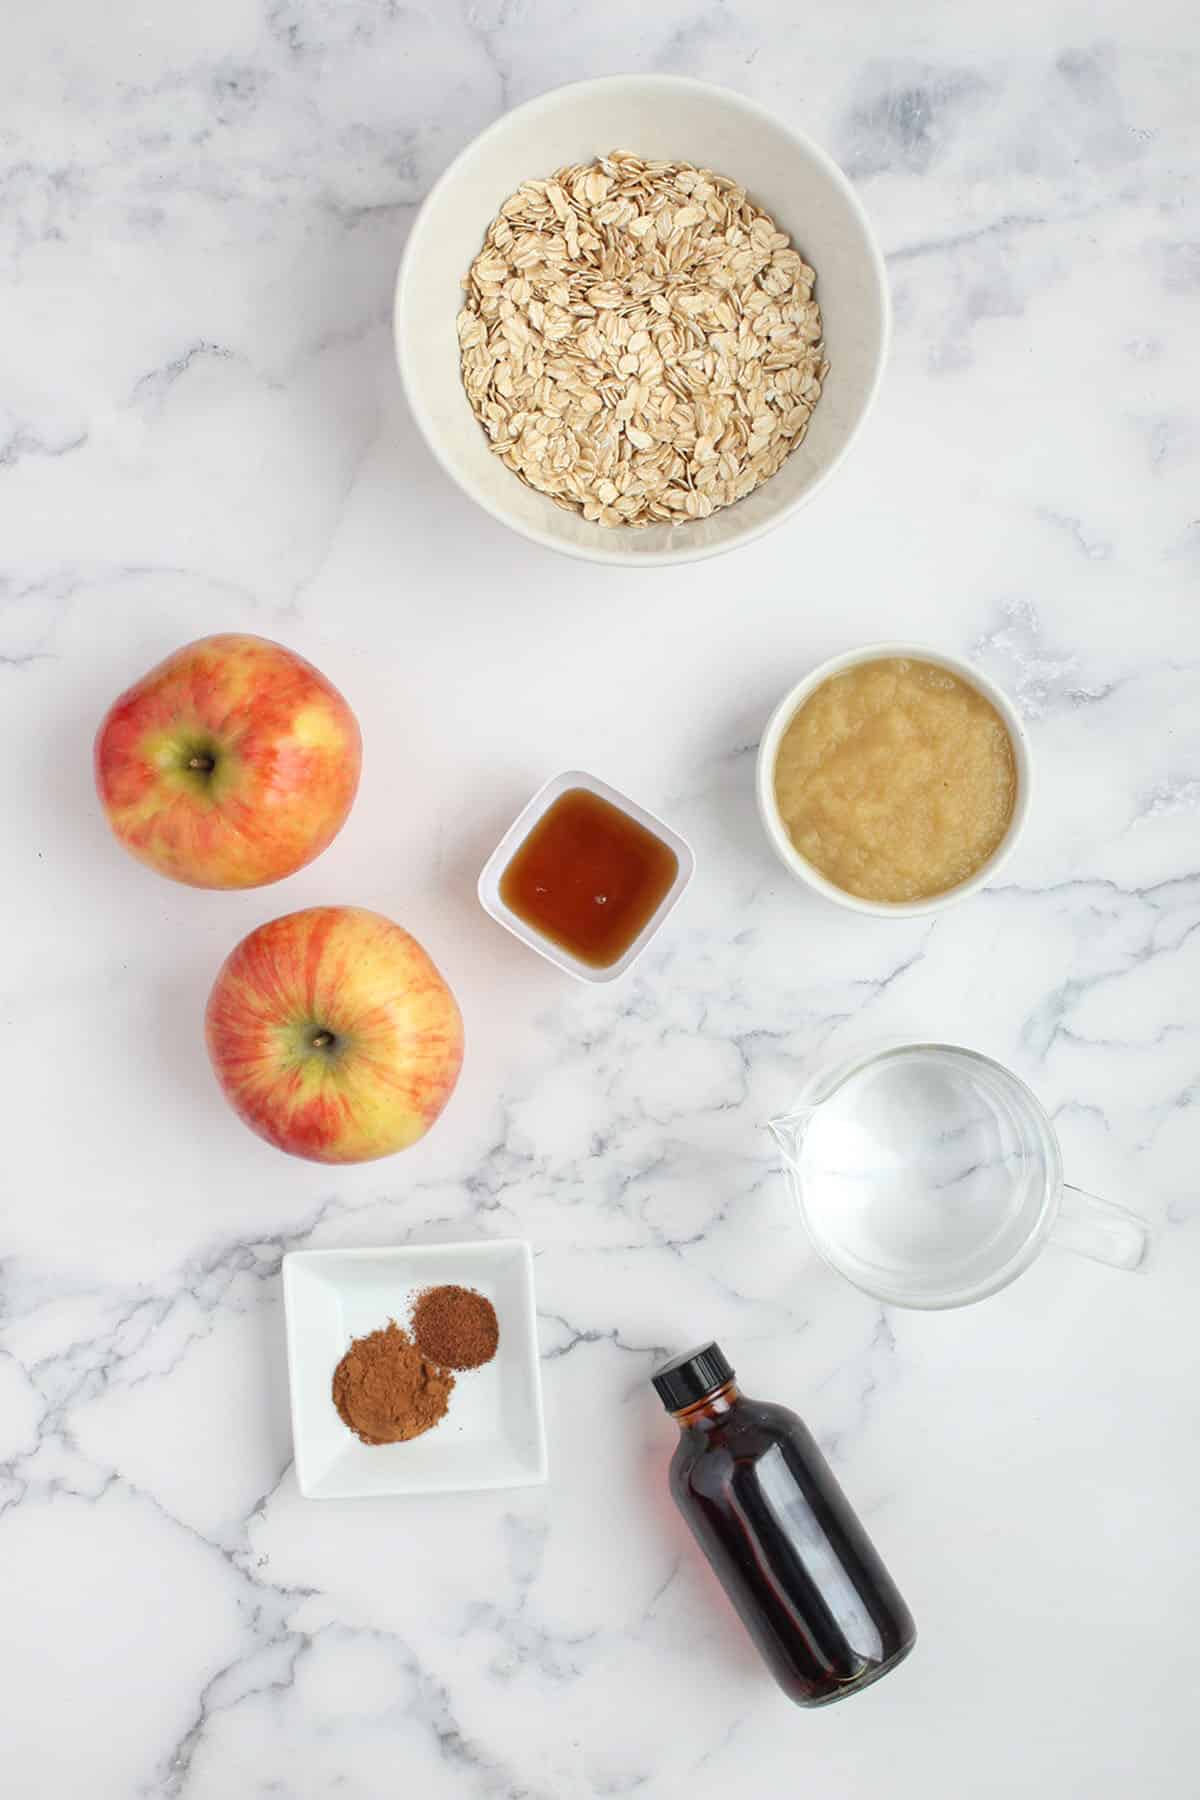 Ingredients for oatmeal with apple and cinnamon